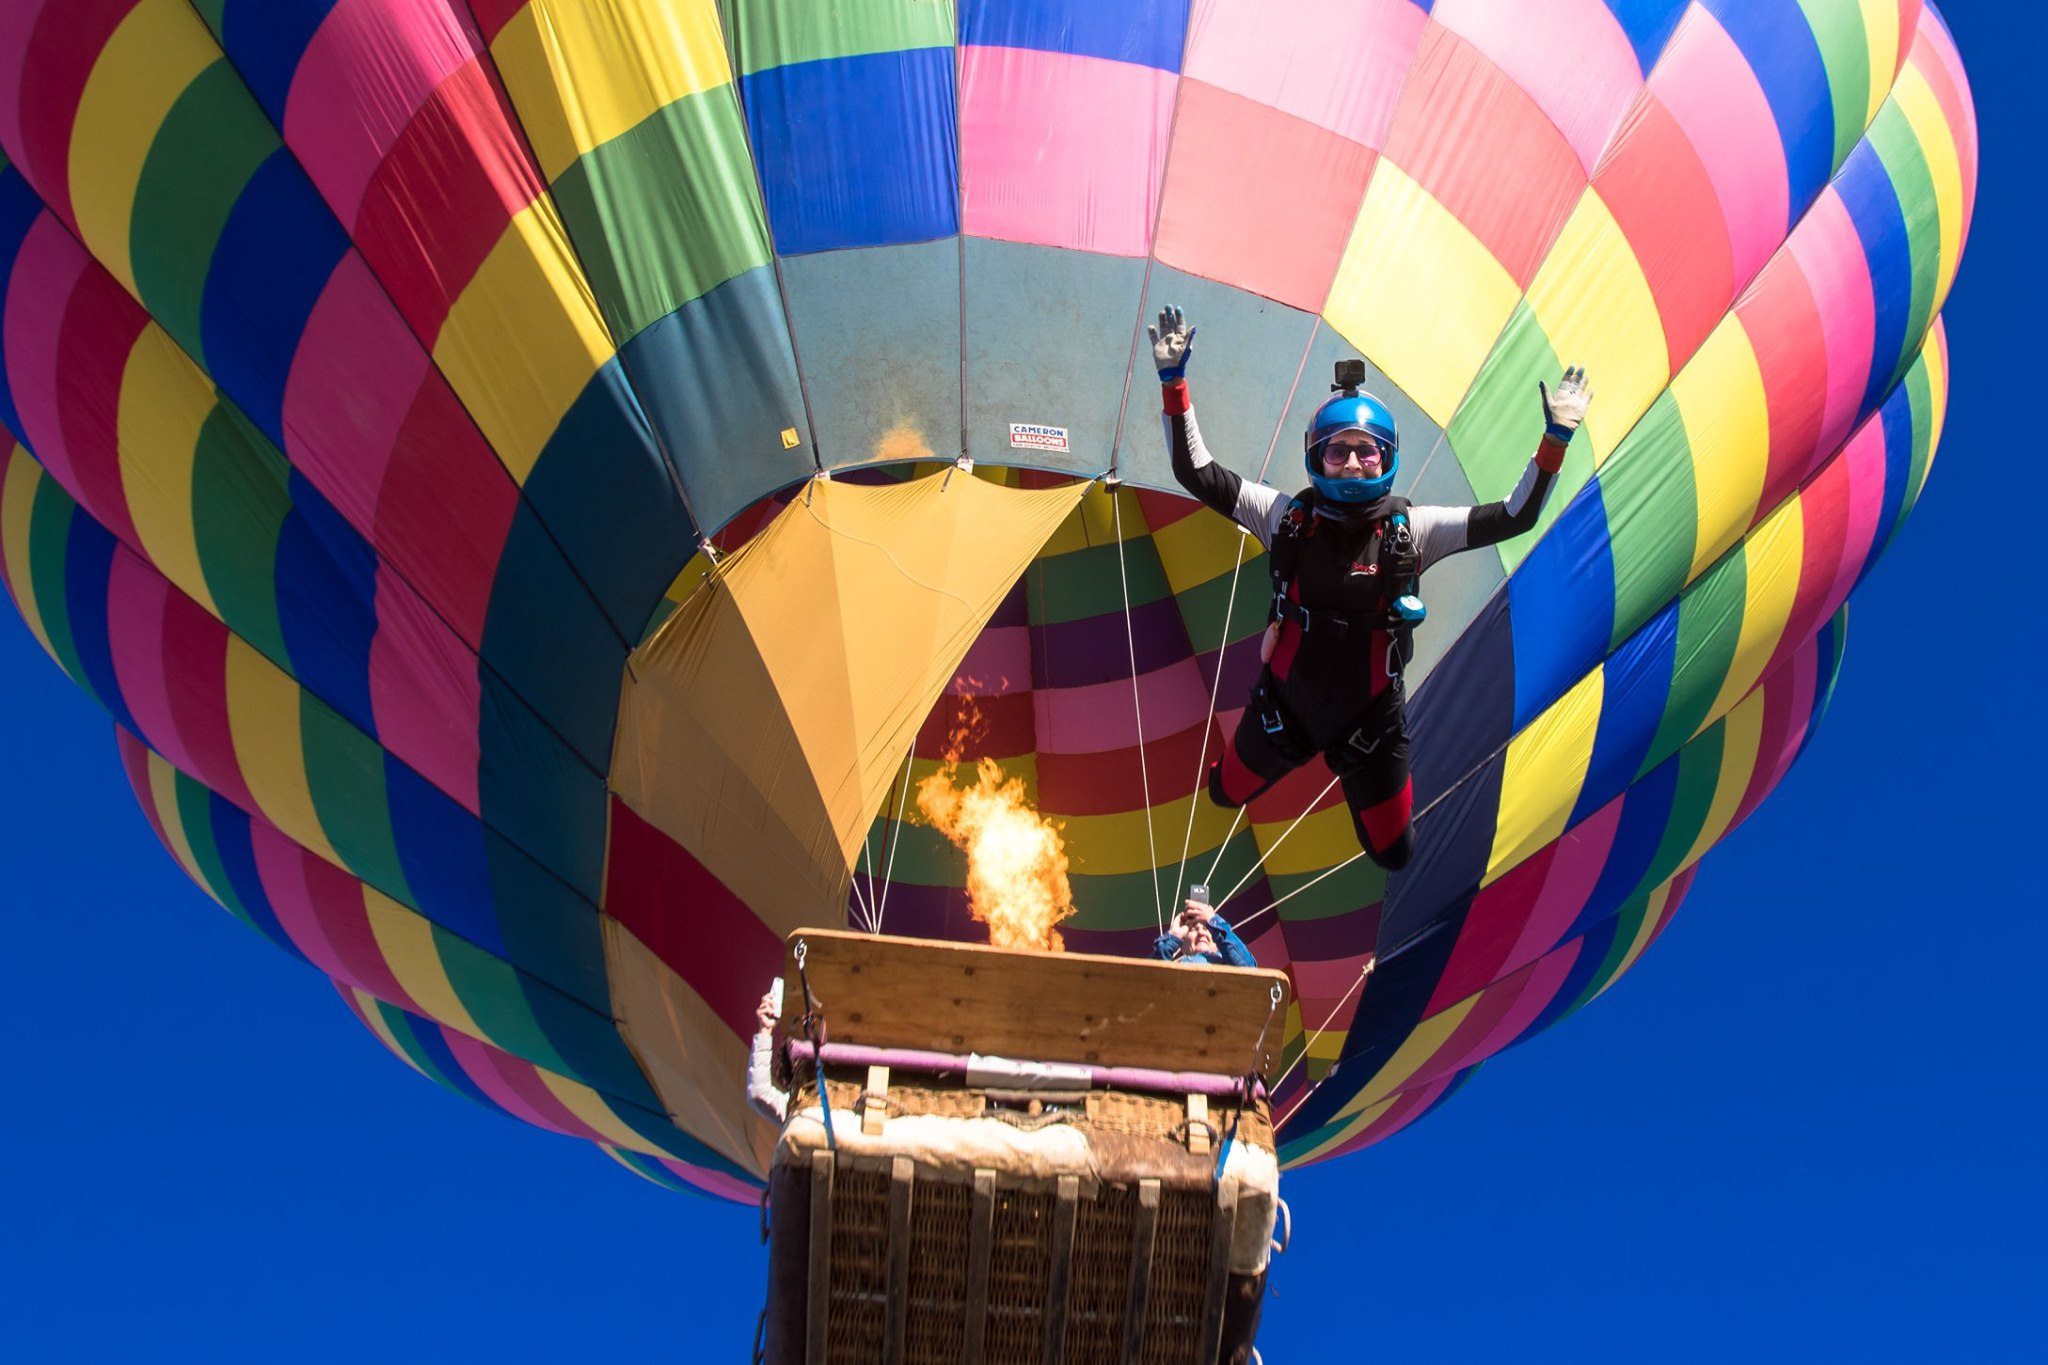 Marie Clark exits from a hot air balloon at Skydive Perris